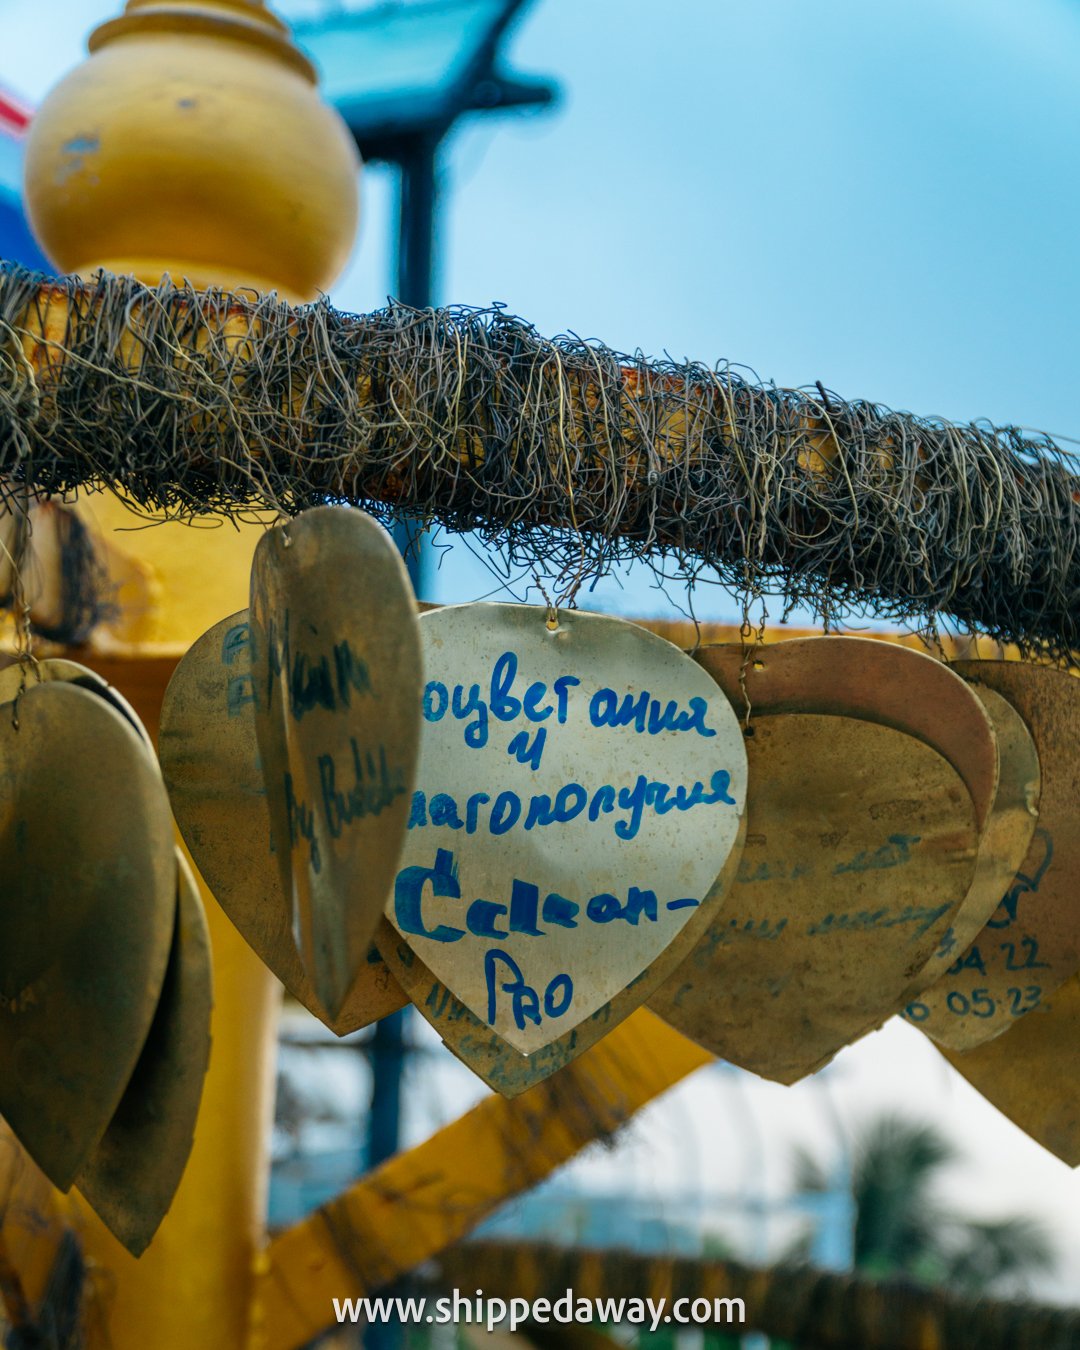 Notes and donations left by visitors at Big Buddha in Phuket, Thailand